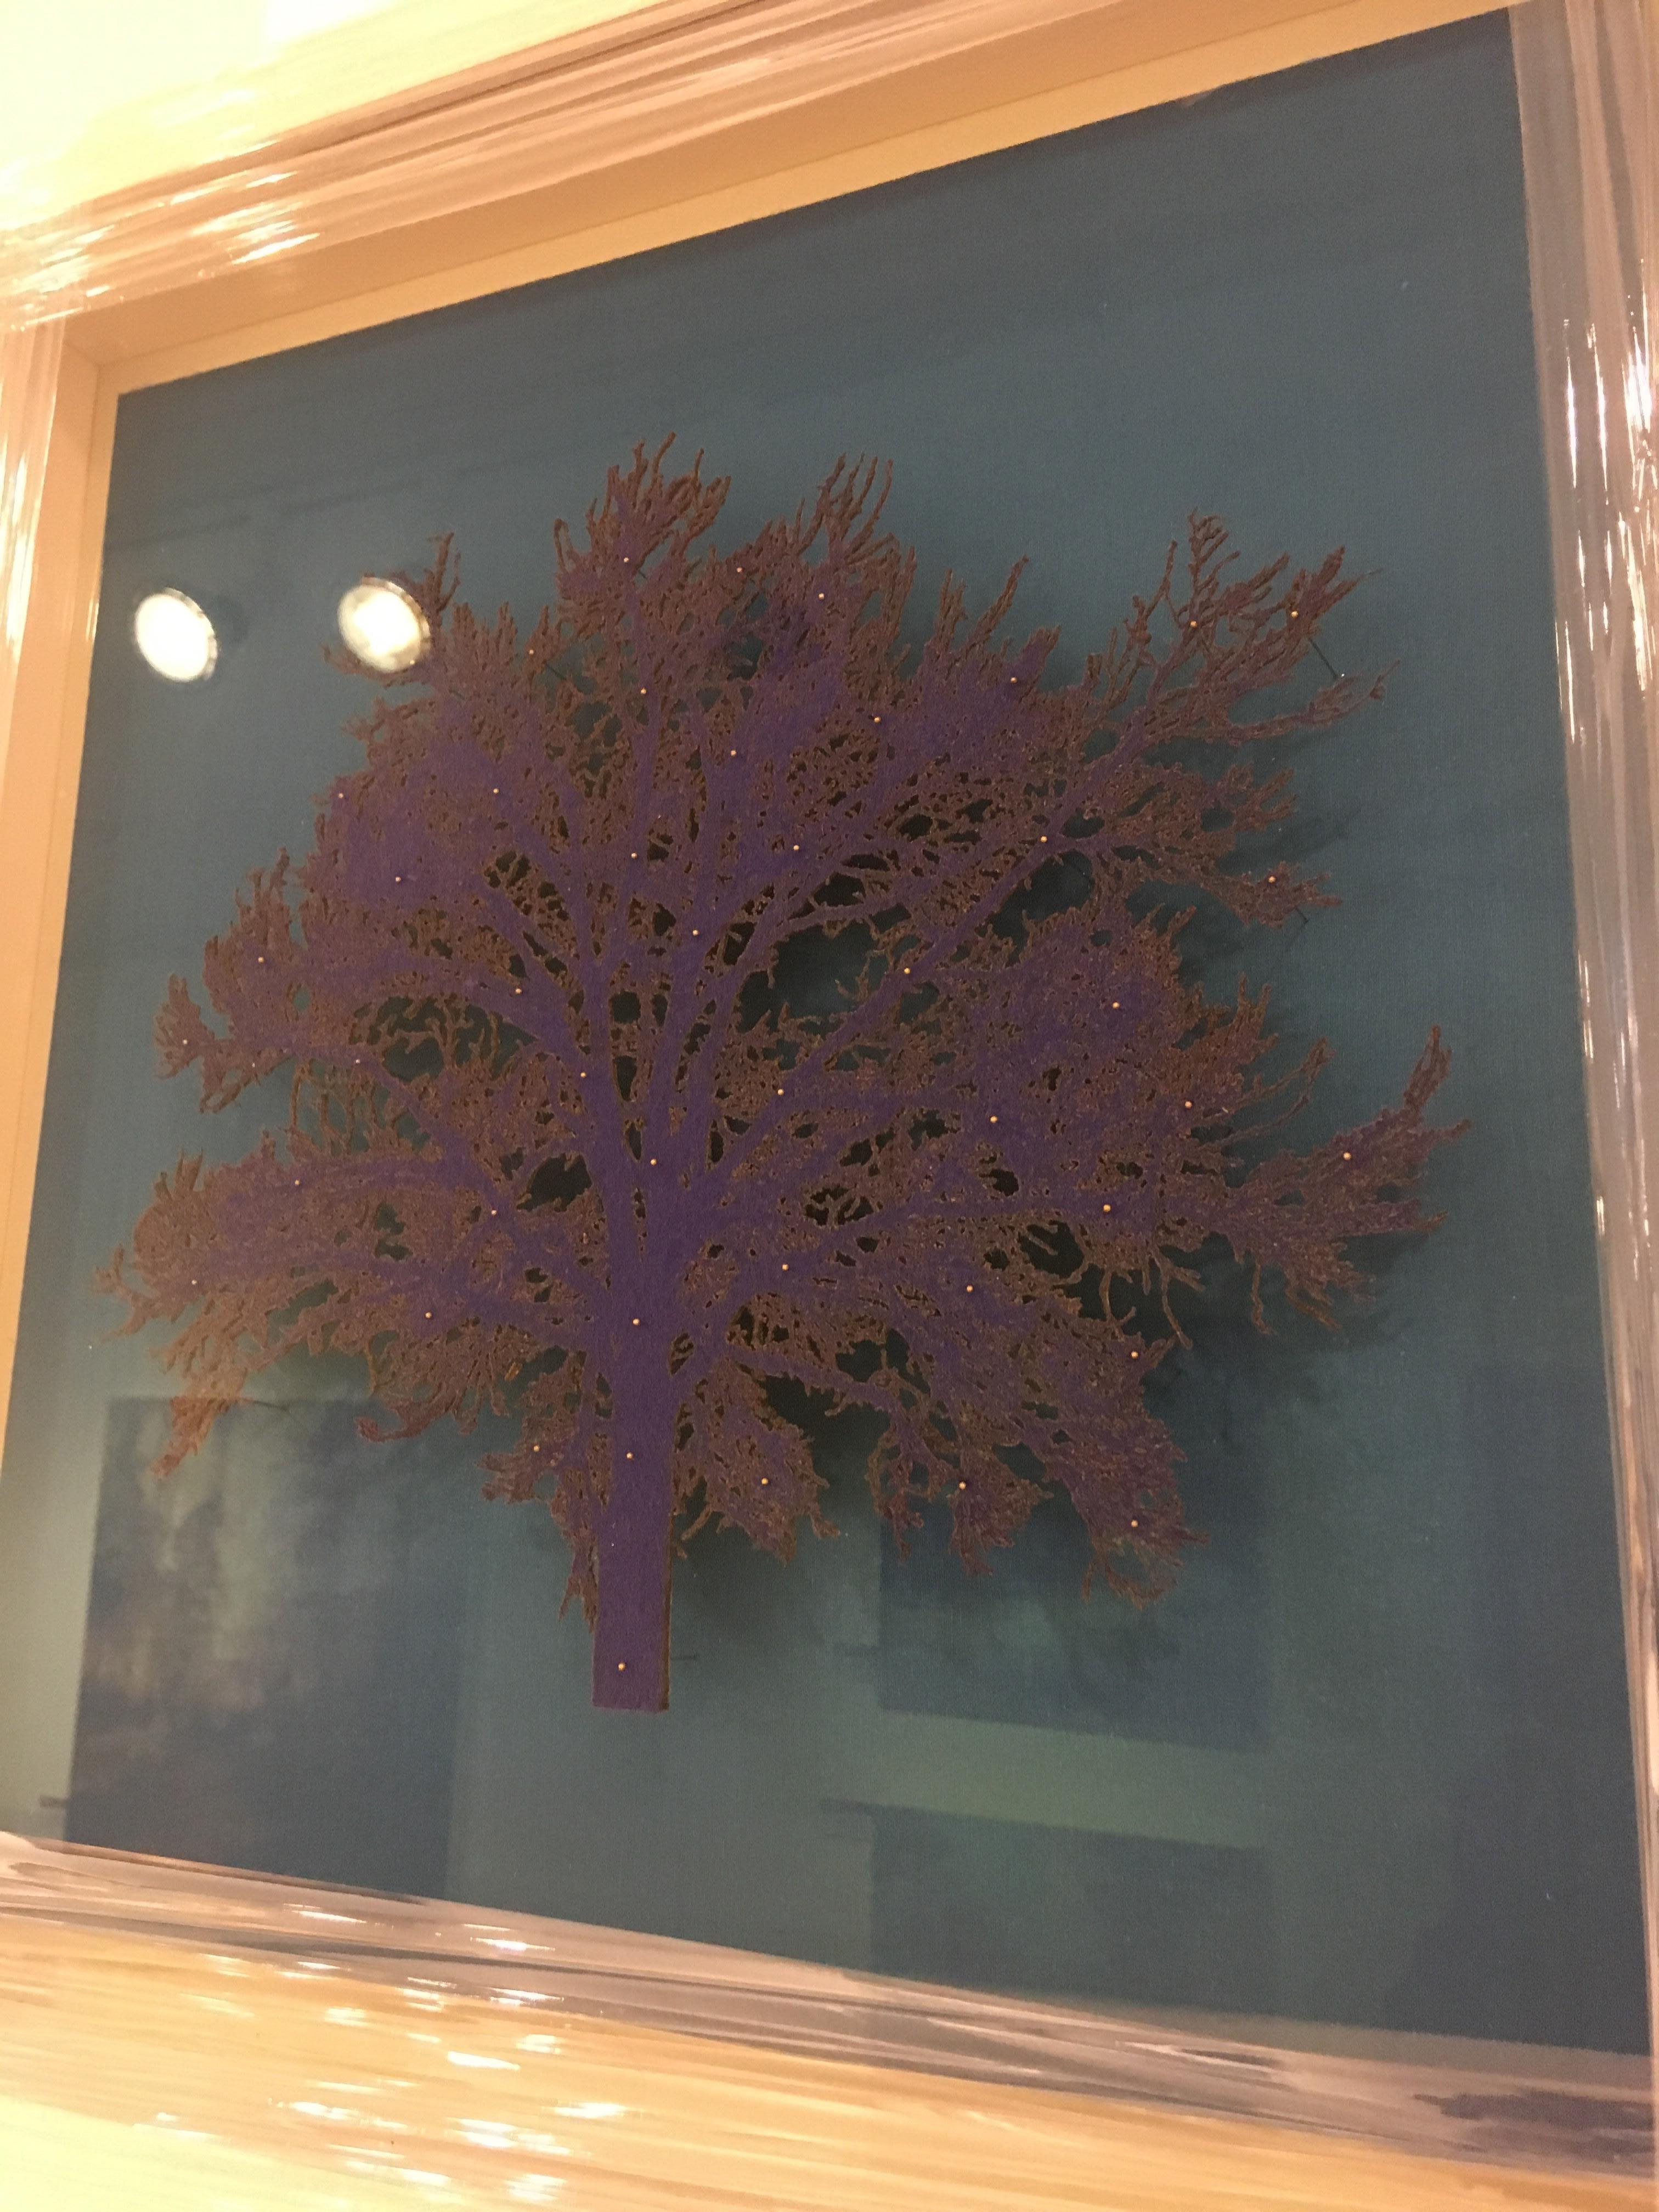 Emma delicately cuts images, especially trees, from a medium like felt or paper and pins them minutely to their chosen background, raised ethereally from the surface, forming beautiful shadows and layers.

‘’Colour, texture and light all inspire,